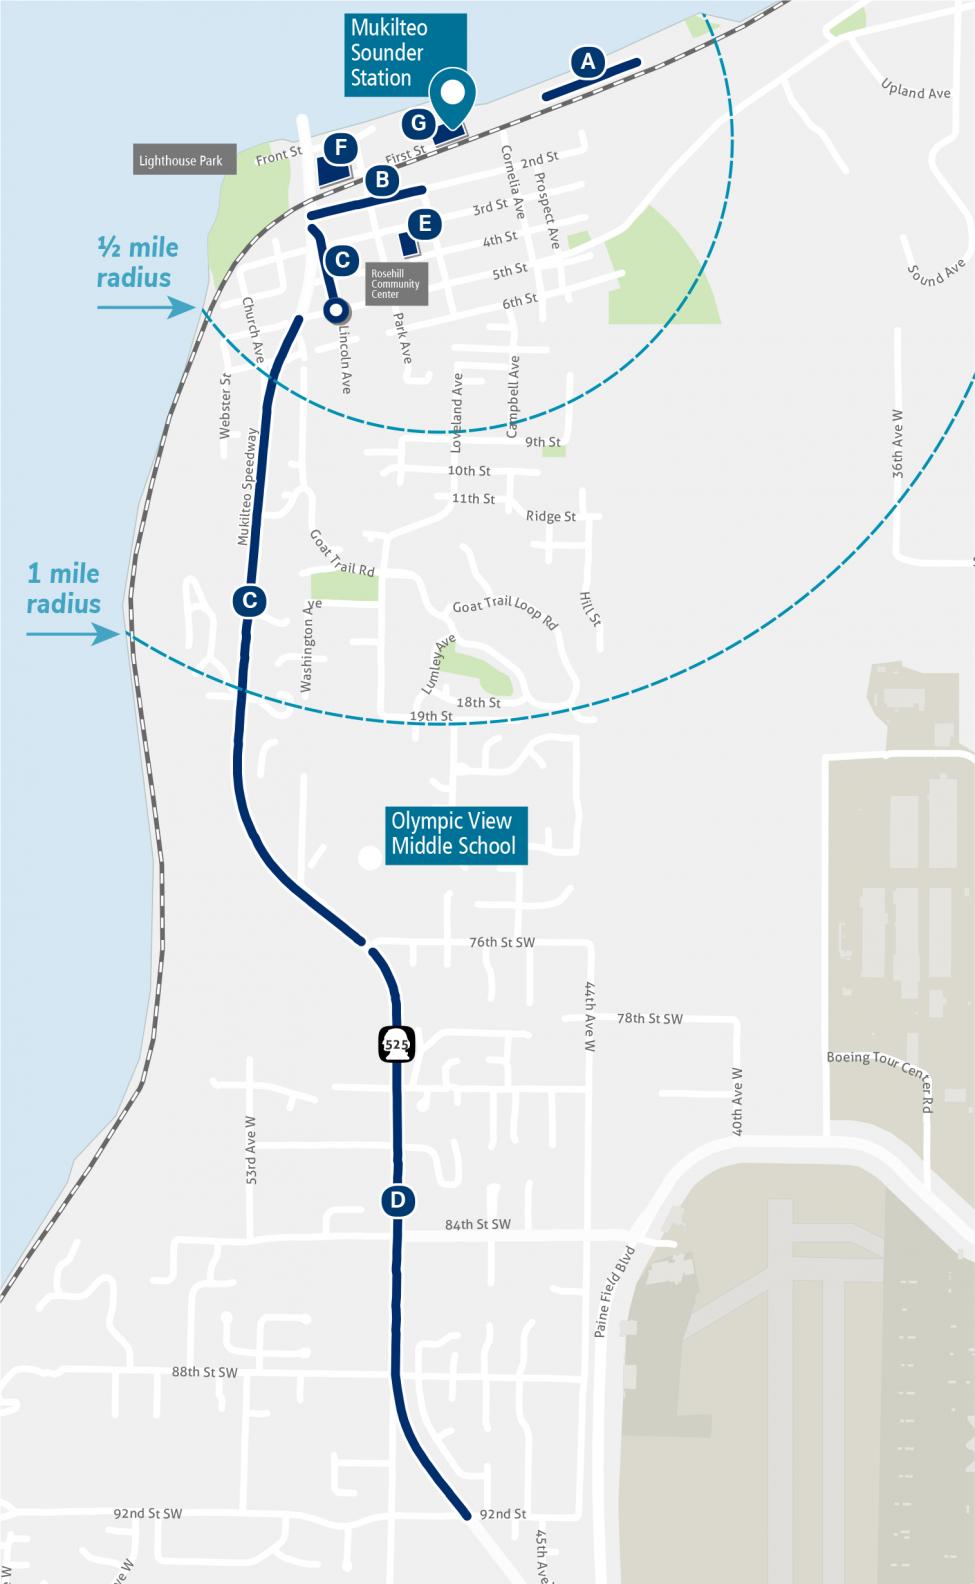 Map of Mukilteo projects under consideration